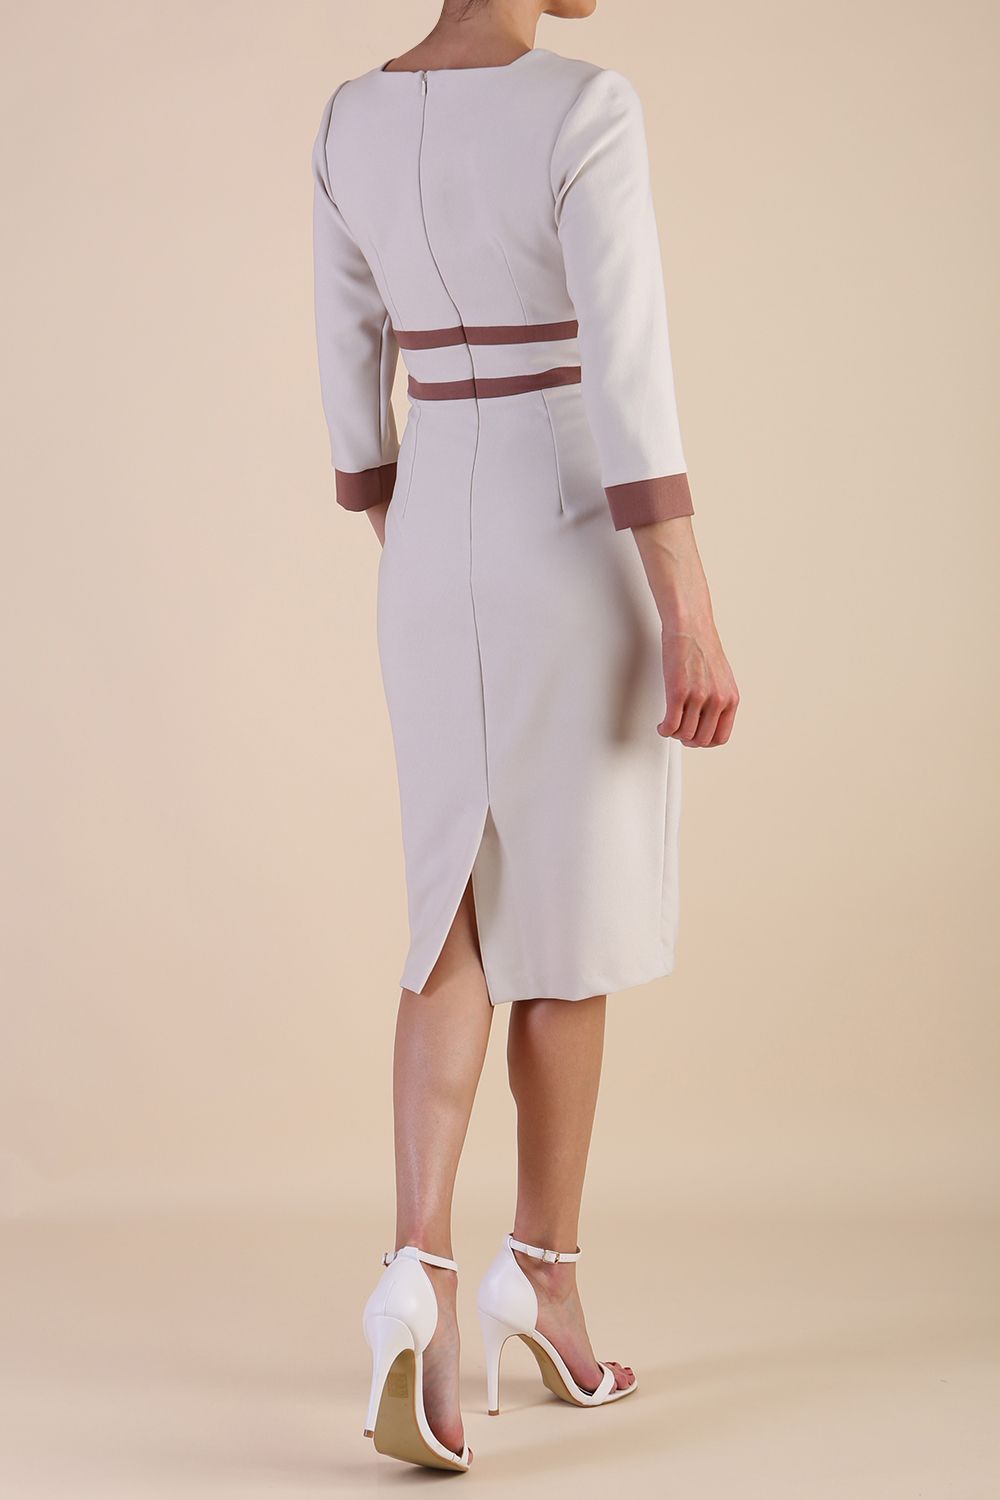 brunette model wearing Diva catwalk Paeonia dress square neckline with a vent in sandshell beige with Acorn Brown and sandshell beige stripes around the waist and three quarter sleeve with Acorn Brown contrast finish back